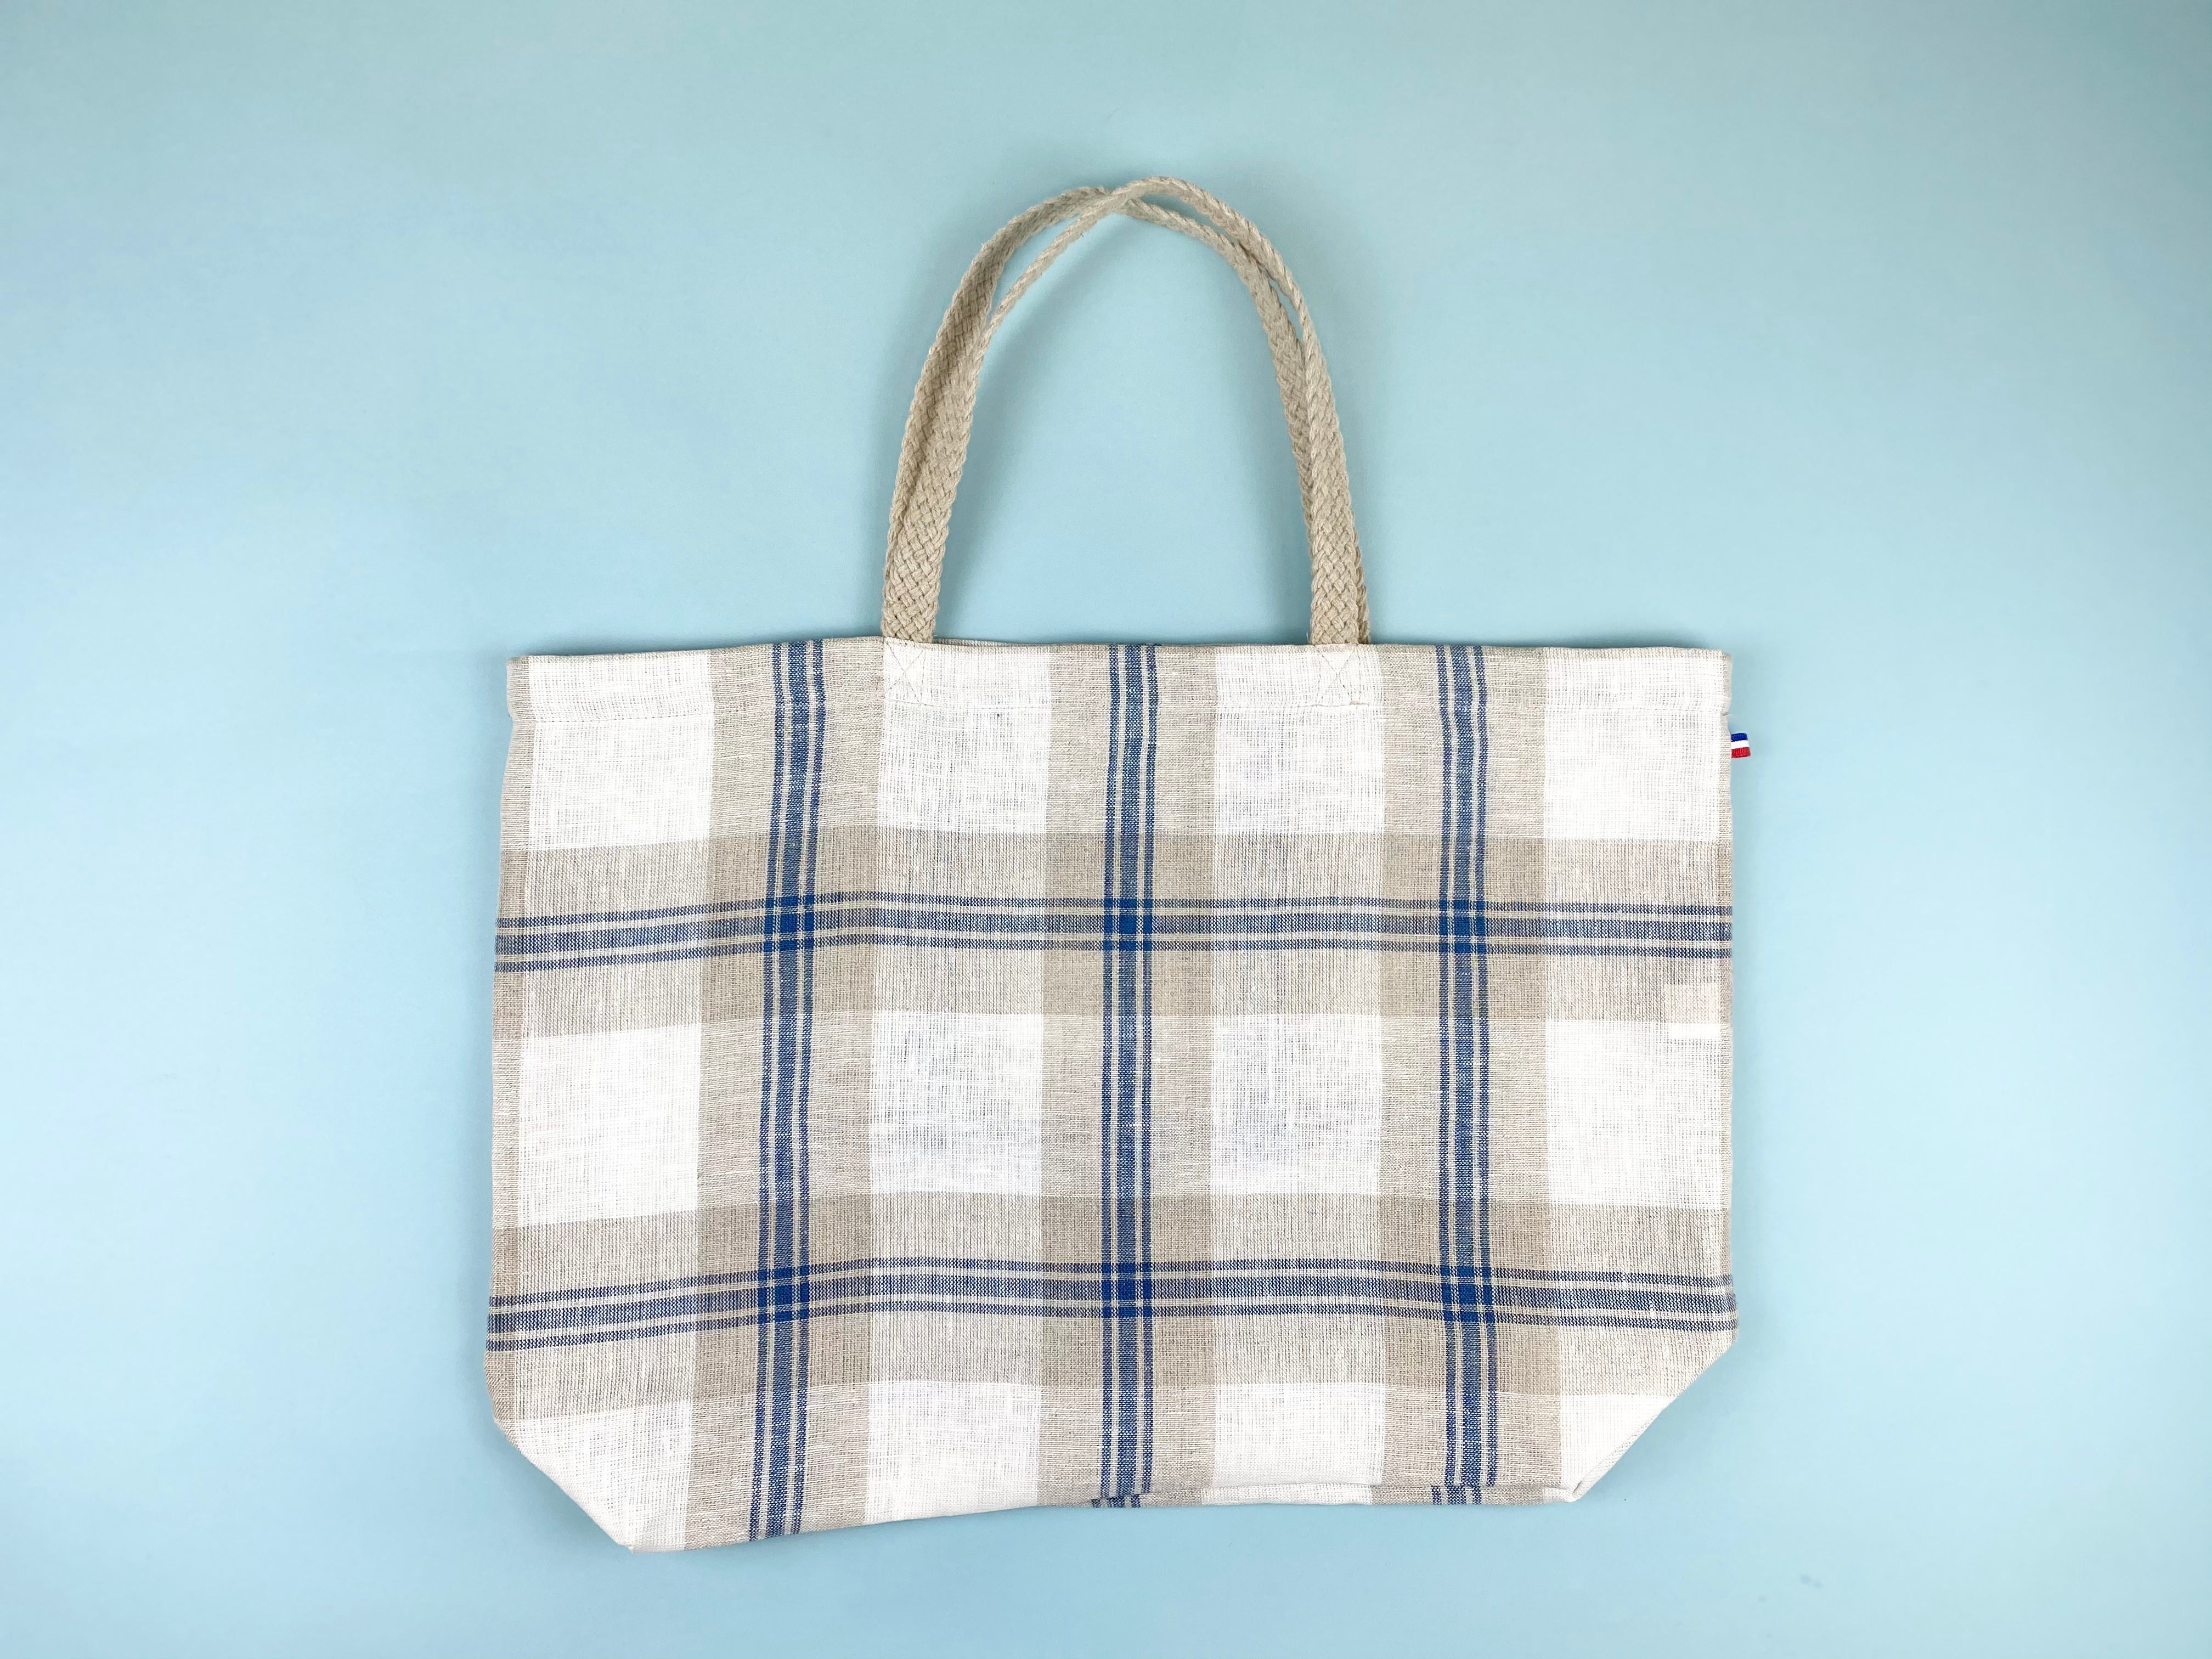 Cassandre Blue Plaid Thieffry Linen Shopping Bag with Braided Handle and Inner Zipper Pocket - Textile - Thieffry - Brand_Thieffry - New Arrivals - Shopping Bags - Textiles_Tote Bags - Thieffry - 7414-1001CassandreBluePlaidThieffryShoppingBag_BraidedHandle_ZipperPocket